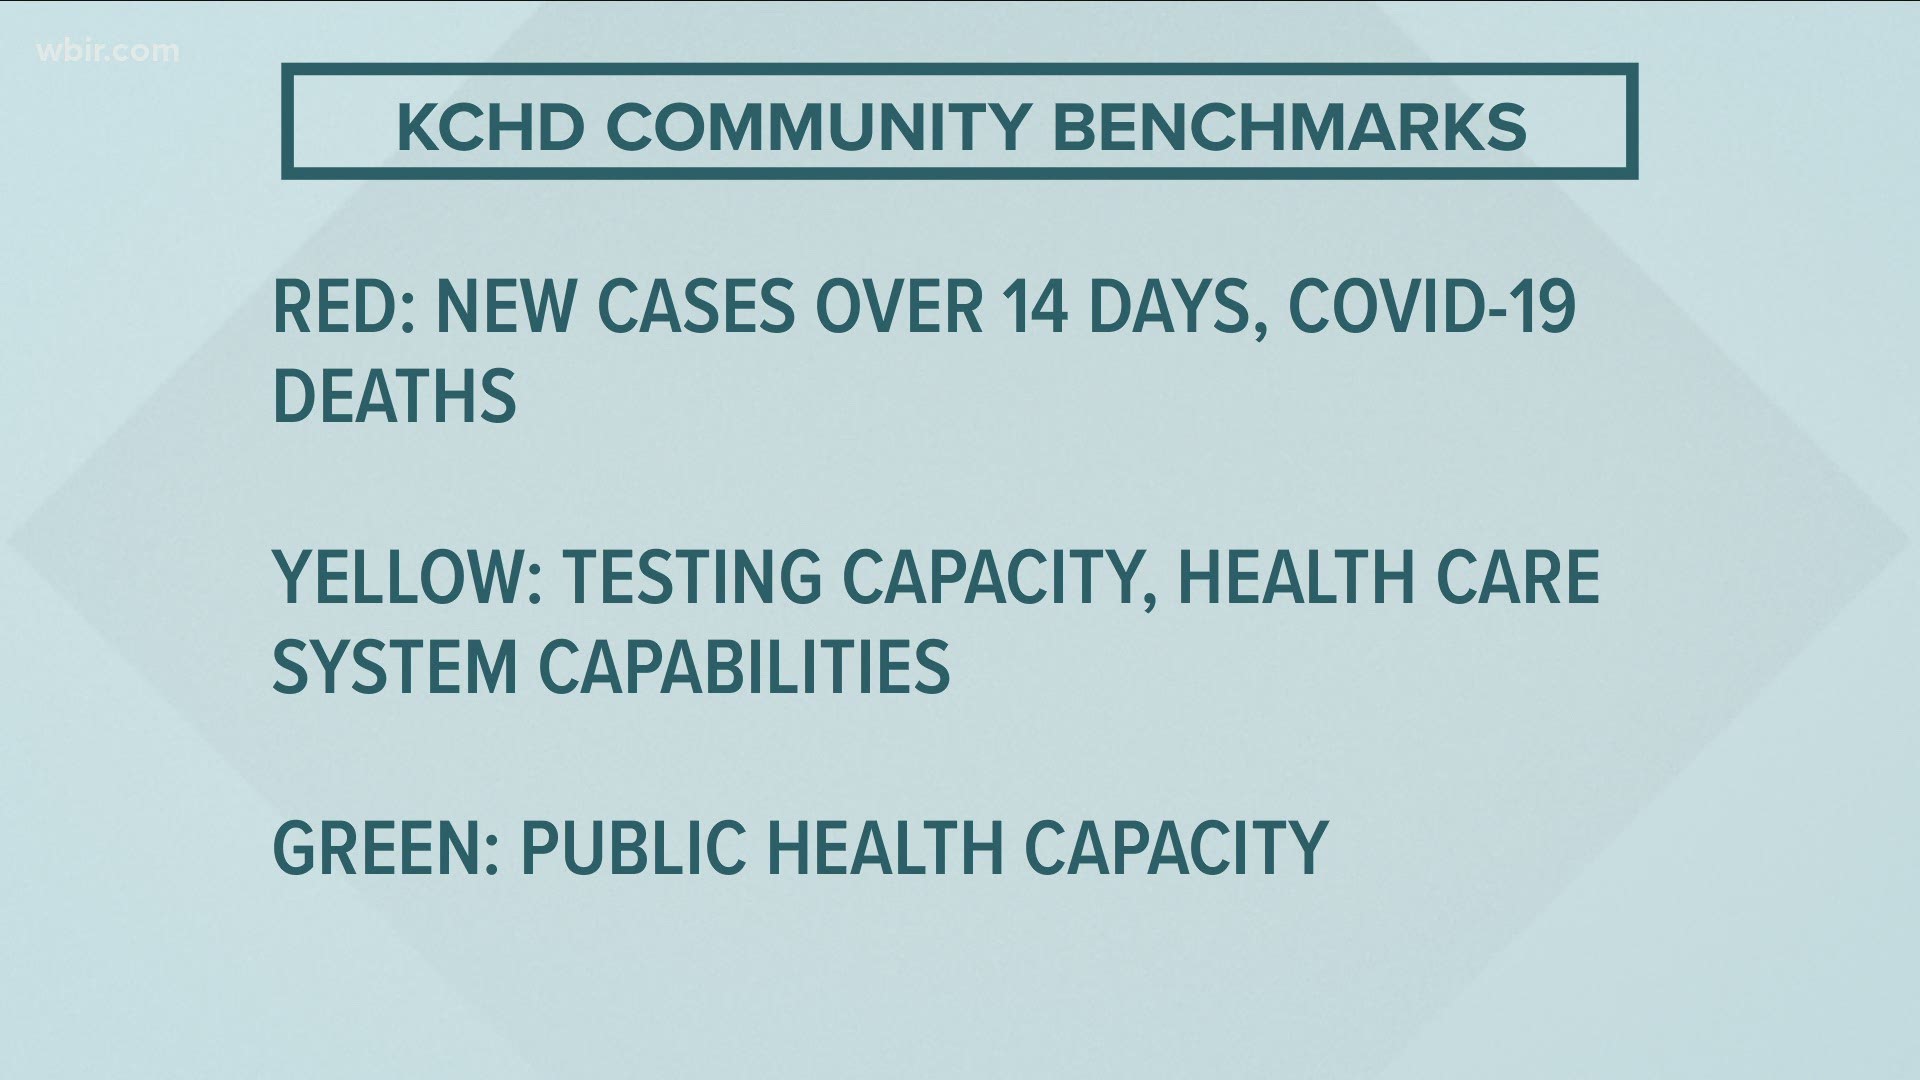 There were no new changes in the Knox County Health Department's community benchmarks for the week of July 22-28.